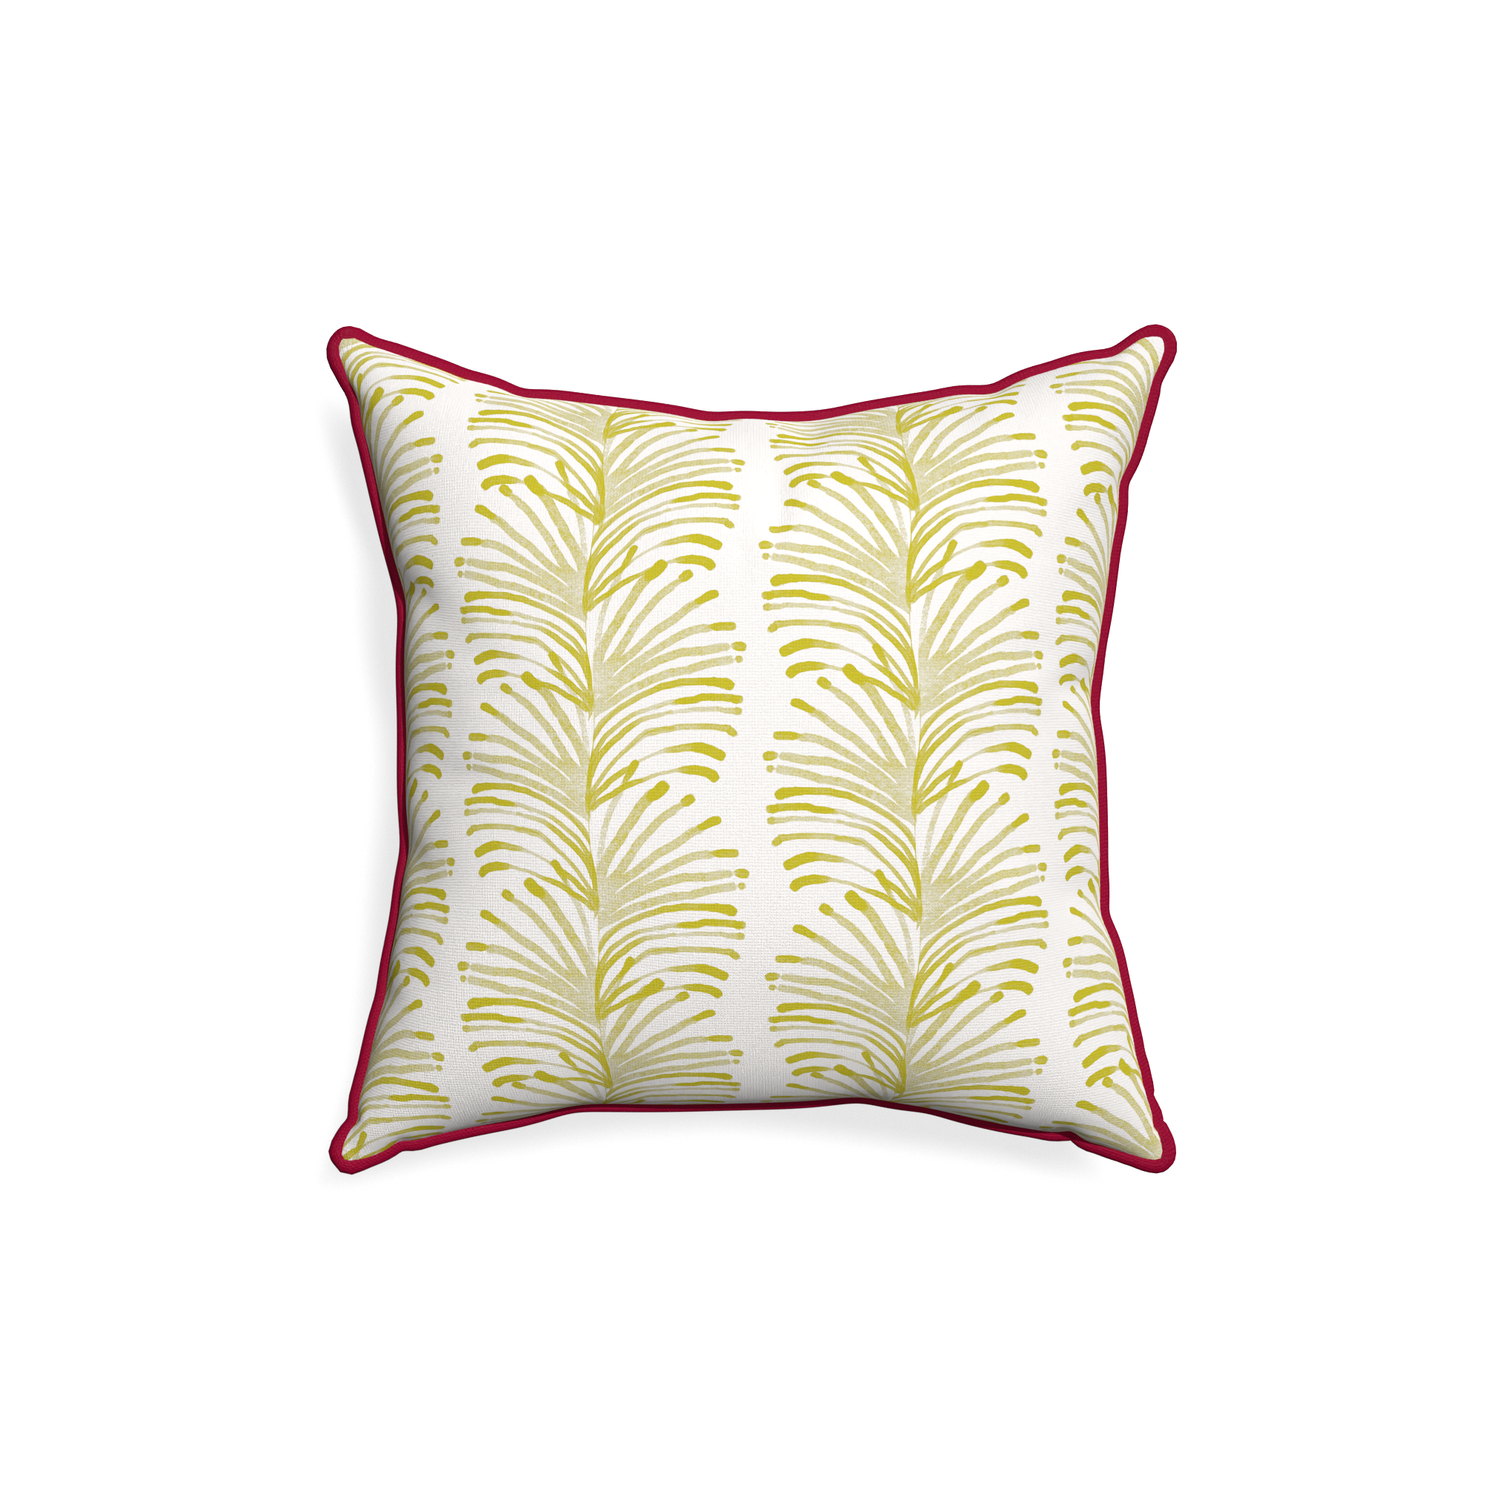 18-square emma chartreuse custom pillow with raspberry piping on white background